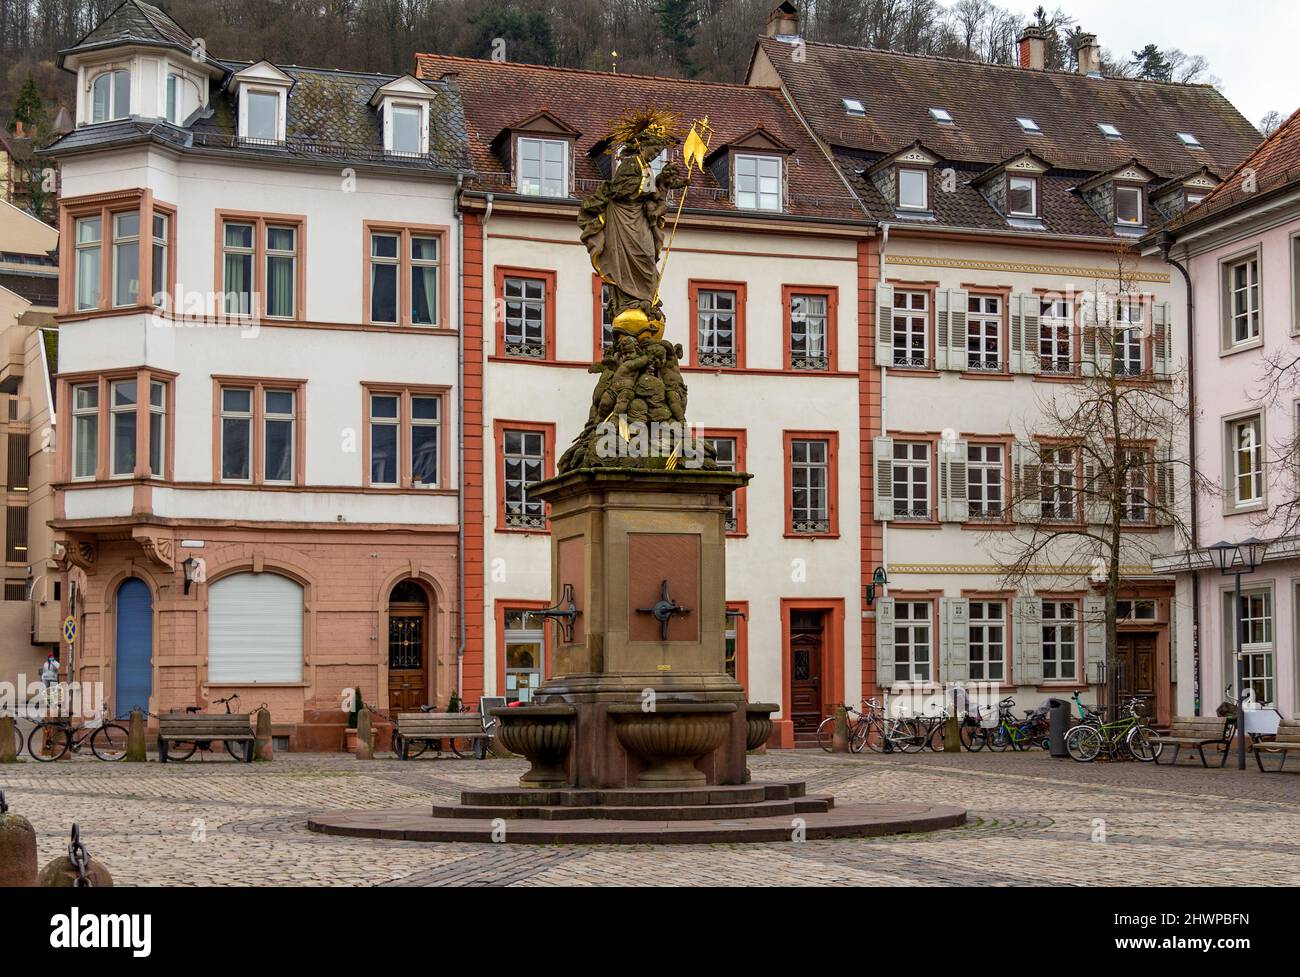 Impression around the Corn Market of Heidelberg in Germany at winter time Stock Photo